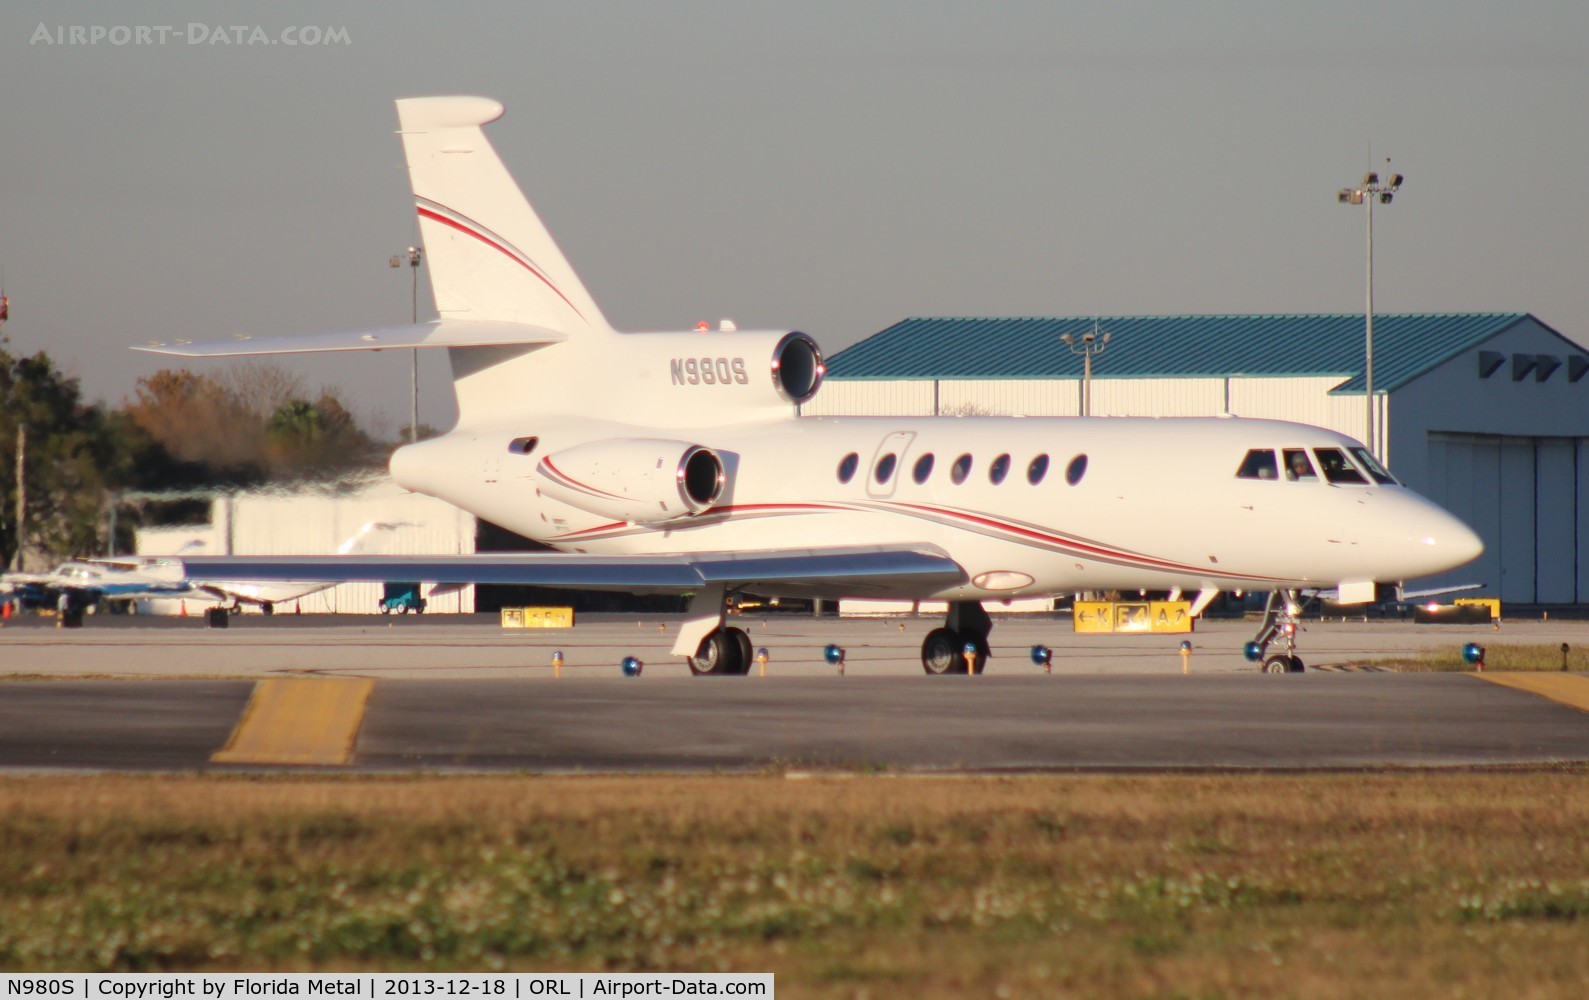 N980S, 1994 Dassault Falcon 50 C/N 249, Outback Steakhouse Falcon 50